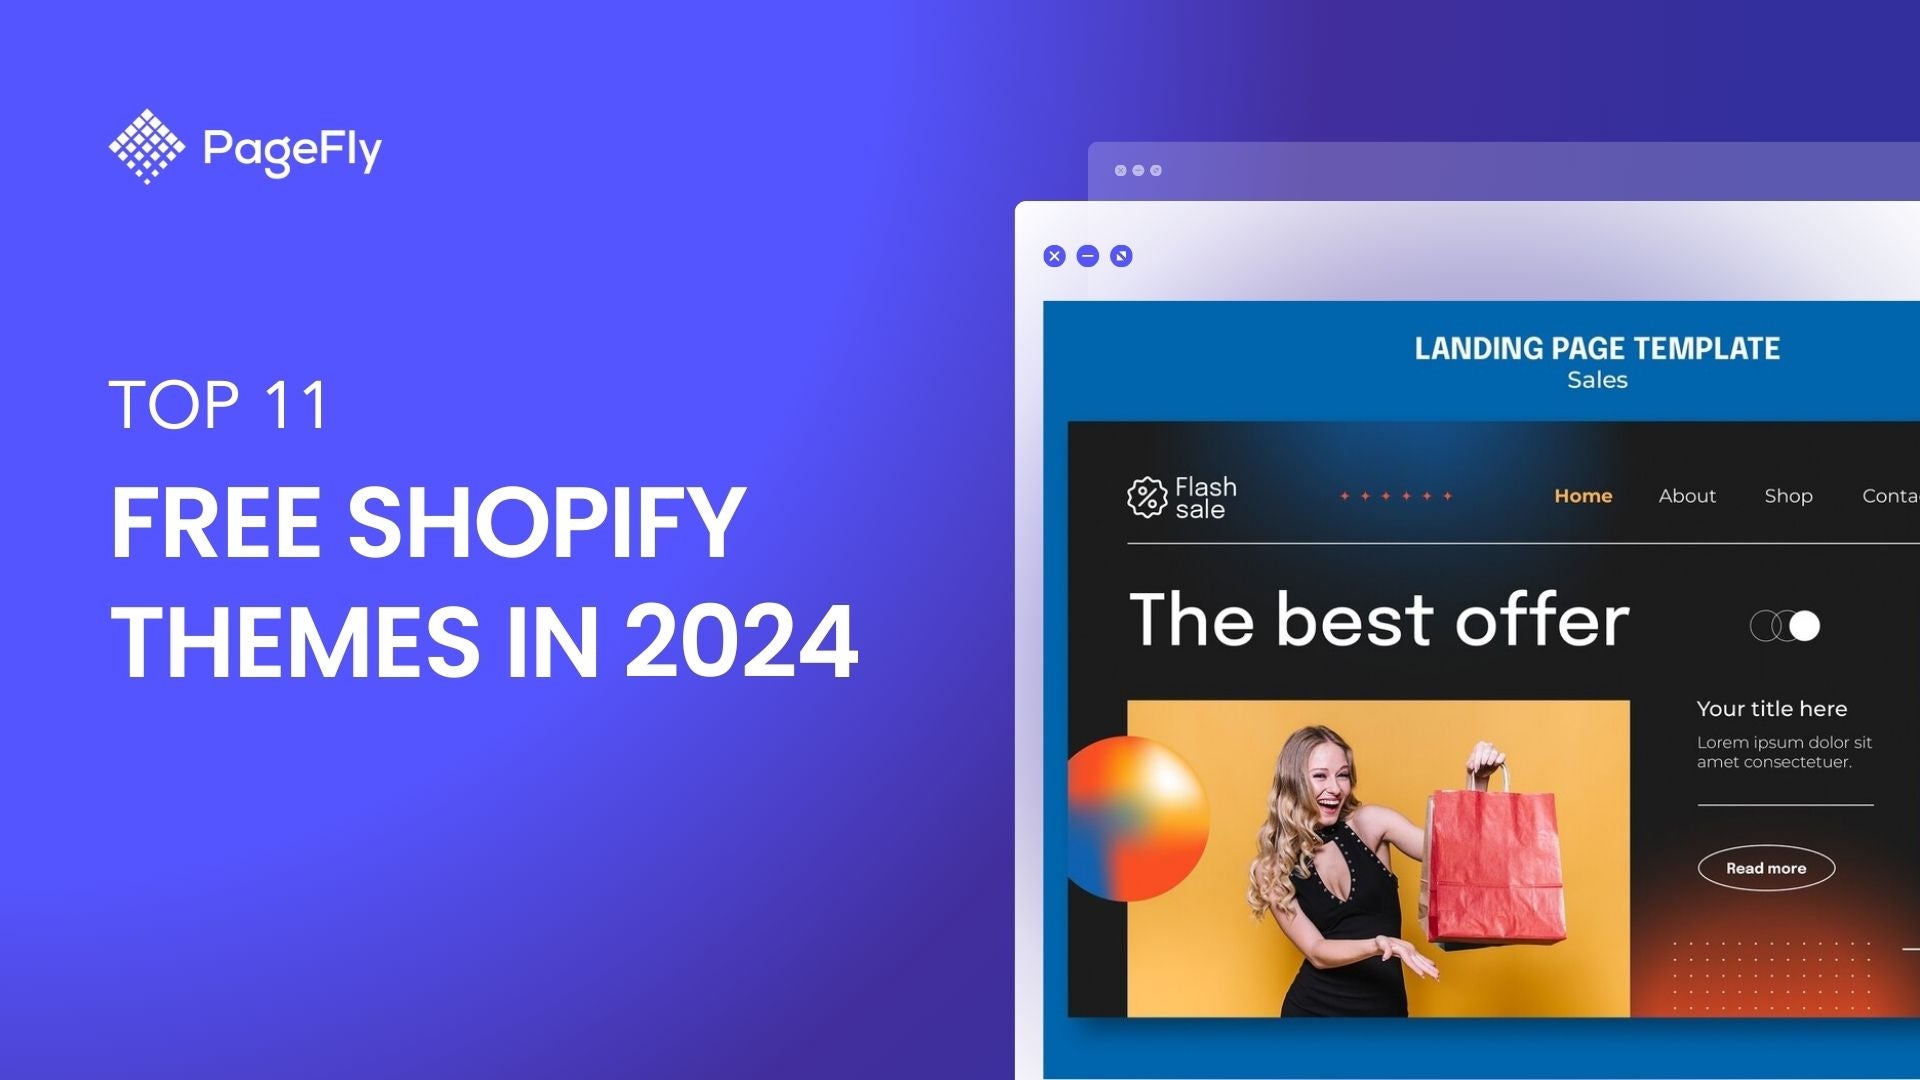 Best Free Shopify Themes for 2024: Expert Reviews of 11 Top Choices